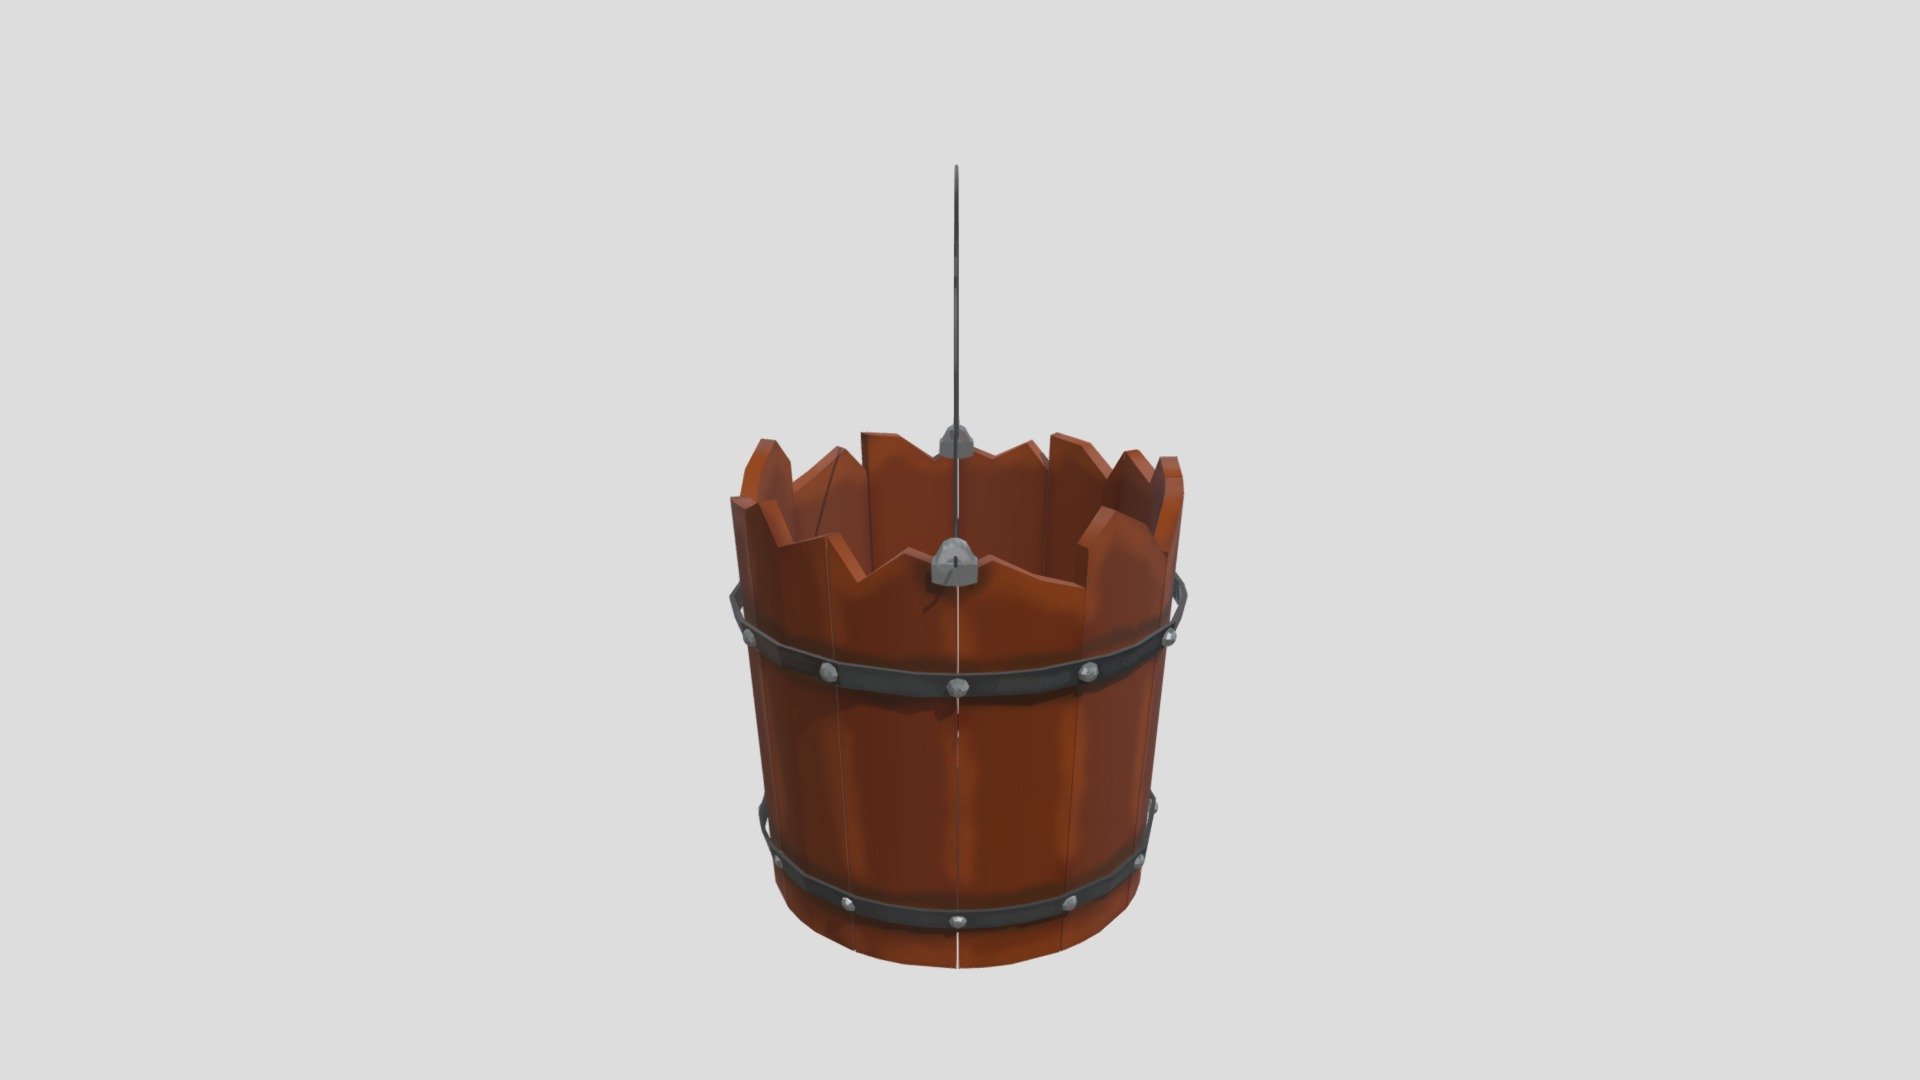 A simple wooden bucket; a staple for any asset collection! Comes already UV mapped and textured, ready to go!

Texture maps include BaseColour, Roughness, and Metallic. Stylised texture hand-painted in Substance Painter. Modelled in Maya. The maps were exported from Substance in the Arnold 5 (AiStandard) configuration.

Polycount: 1671

Zipped folder includes: obj., fbx., mtl., Maya ASCII file, folder of texture maps.

Don't hesitate to send me a wee message if there is anything I can modify about this model that would make it more suitable for your project! :) - Simple Wooden Bucket - Buy Royalty Free 3D model by smcafee-3d (@smcafee) 3d model